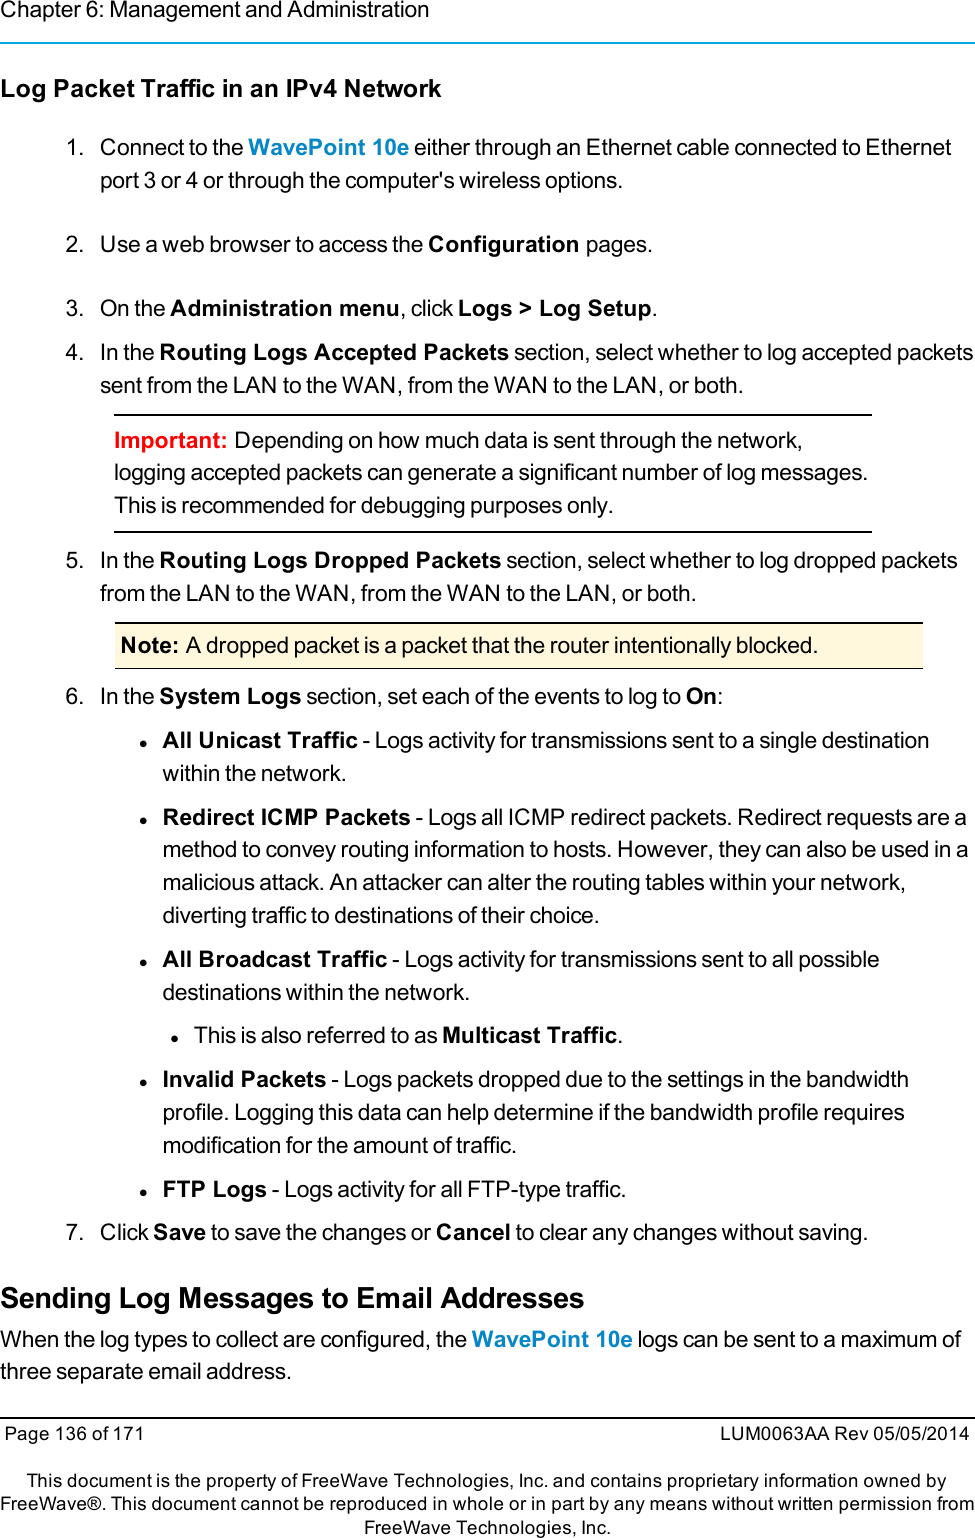 Chapter 6: Management and AdministrationLog Packet Traffic in an IPv4 Network1. Connect to the WavePoint 10e either through an Ethernet cable connected to Ethernetport 3 or 4 or through the computer&apos;s wireless options.2. Use a web browser to access the Configuration pages.3. On the Administration menu, click Logs &gt; Log Setup.4. In the Routing Logs Accepted Packets section, select whether to log accepted packetssent from the LAN to the WAN, from the WAN to the LAN, or both.Important: Depending on how much data is sent through the network,logging accepted packets can generate a significant number of log messages.This is recommended for debugging purposes only.5. In the Routing Logs Dropped Packets section, select whether to log dropped packetsfrom the LAN to the WAN, from the WAN to the LAN, or both.Note: A dropped packet is a packet that the router intentionally blocked.6. In the System Logs section, set each of the events to log to On:lAll Unicast Traffic - Logs activity for transmissions sent to a single destinationwithin the network.lRedirect ICMP Packets - Logs all ICMP redirect packets. Redirect requests are amethod to convey routing information to hosts. However, they can also be used in amalicious attack. An attacker can alter the routing tables within your network,diverting traffic to destinations of their choice.lAll Broadcast Traffic - Logs activity for transmissions sent to all possibledestinations within the network.lThis is also referred to as Multicast Traffic.lInvalid Packets - Logs packets dropped due to the settings in the bandwidthprofile. Logging this data can help determine if the bandwidth profile requiresmodification for the amount of traffic.lFTP Logs - Logs activity for all FTP-type traffic.7. Click Save to save the changes or Cancel to clear any changes without saving.Sending Log Messages to Email AddressesWhen the log types to collect are configured, the WavePoint 10e logs can be sent to a maximum ofthree separate email address.Page 136 of 171 LUM0063AA Rev 05/05/2014This document is the property of FreeWave Technologies, Inc. and contains proprietary information owned byFreeWave®. This document cannot be reproduced in whole or in part by any means without written permission fromFreeWave Technologies, Inc.